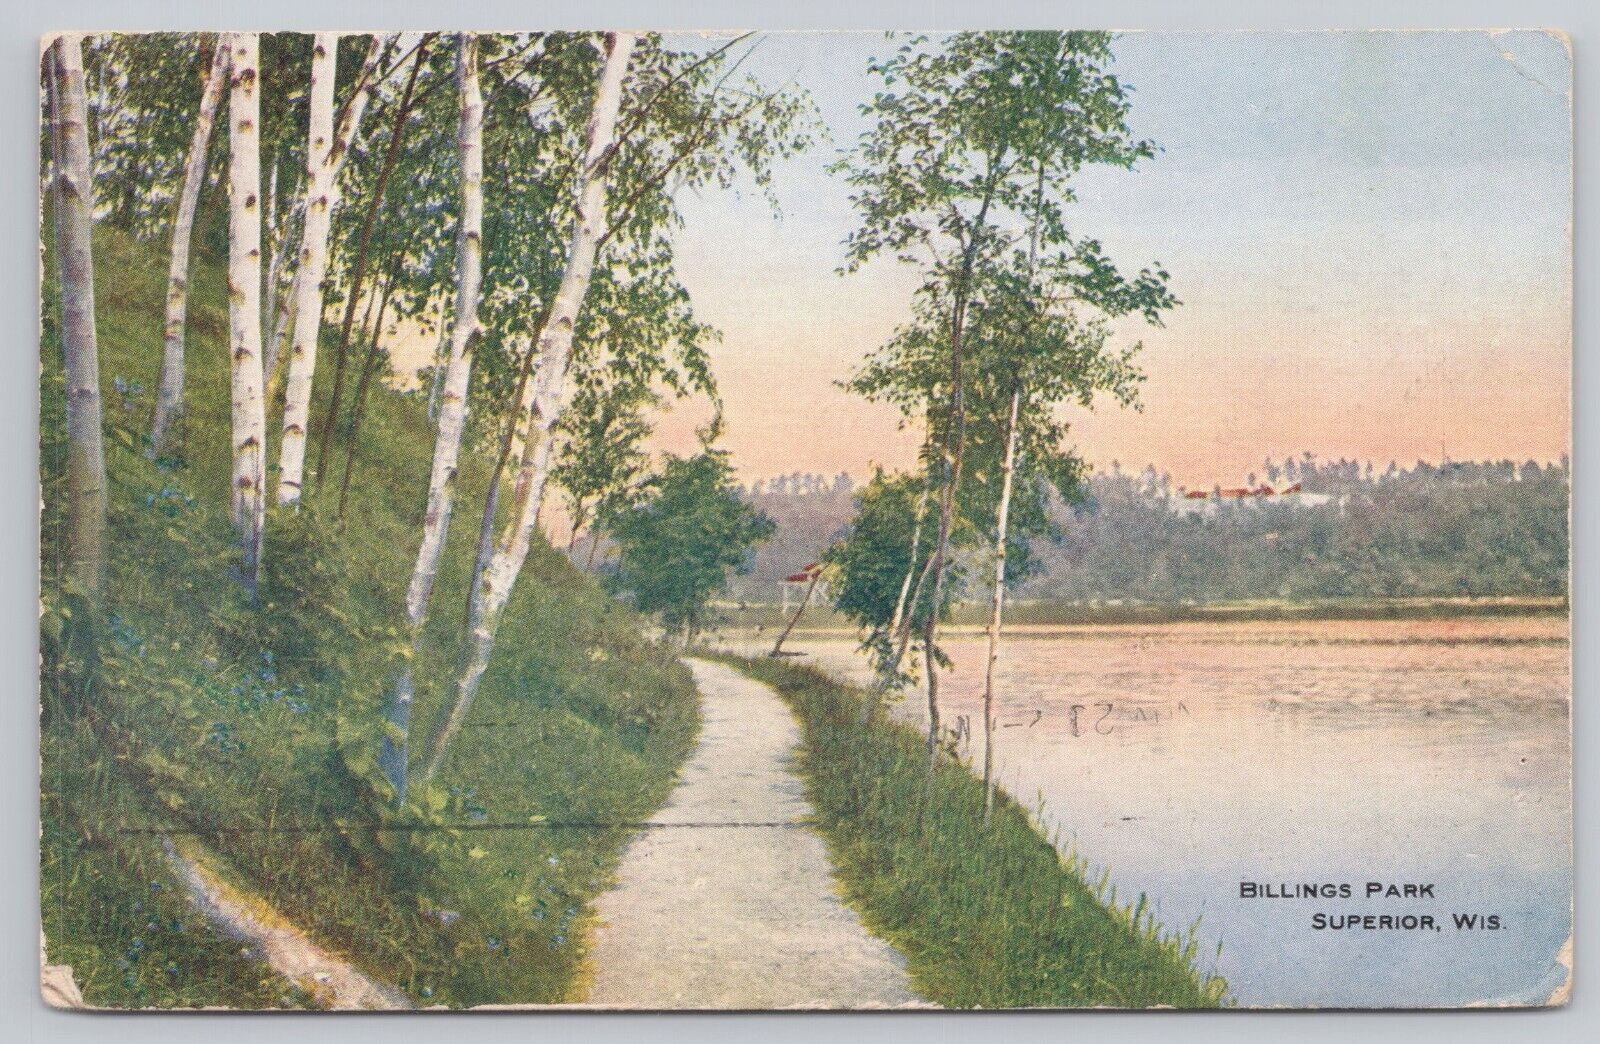 Superior Wisconsin, Billings Park Pathway Scenic View, Vintage Postcard